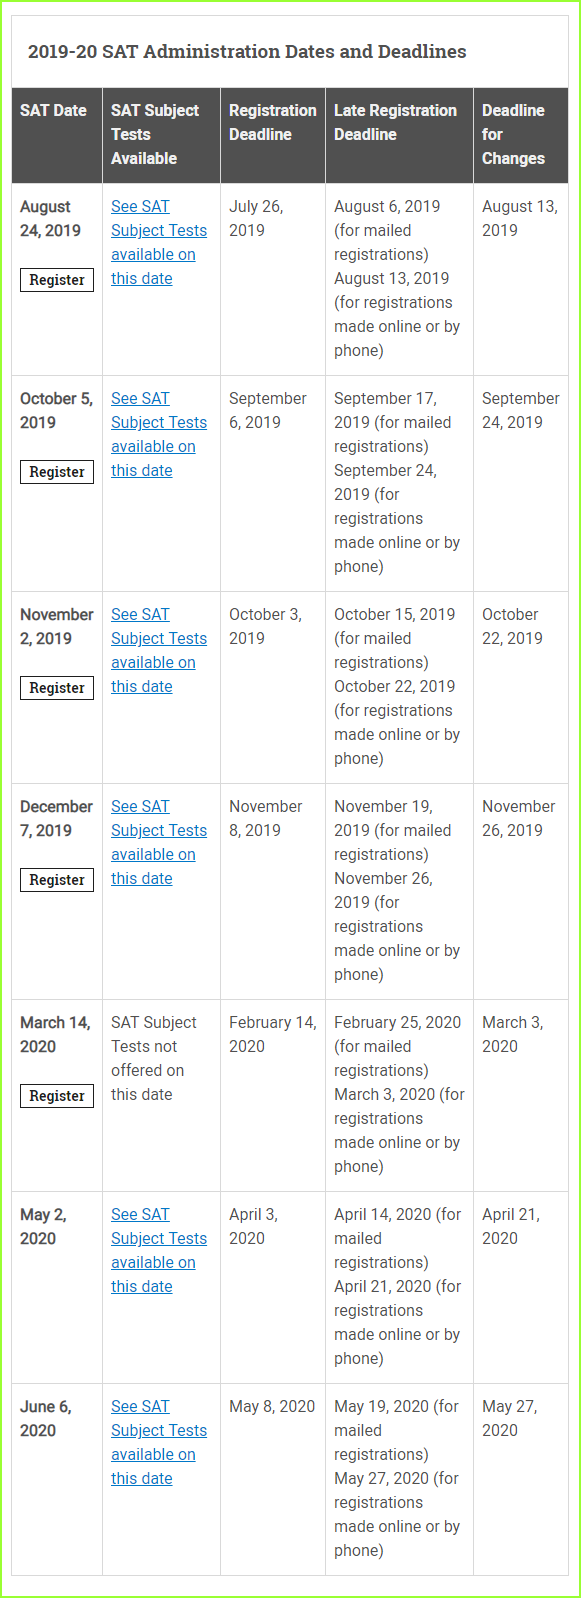 SAT Test Dates and Deadlines SAT Suite of Assessments – The College Board (1)